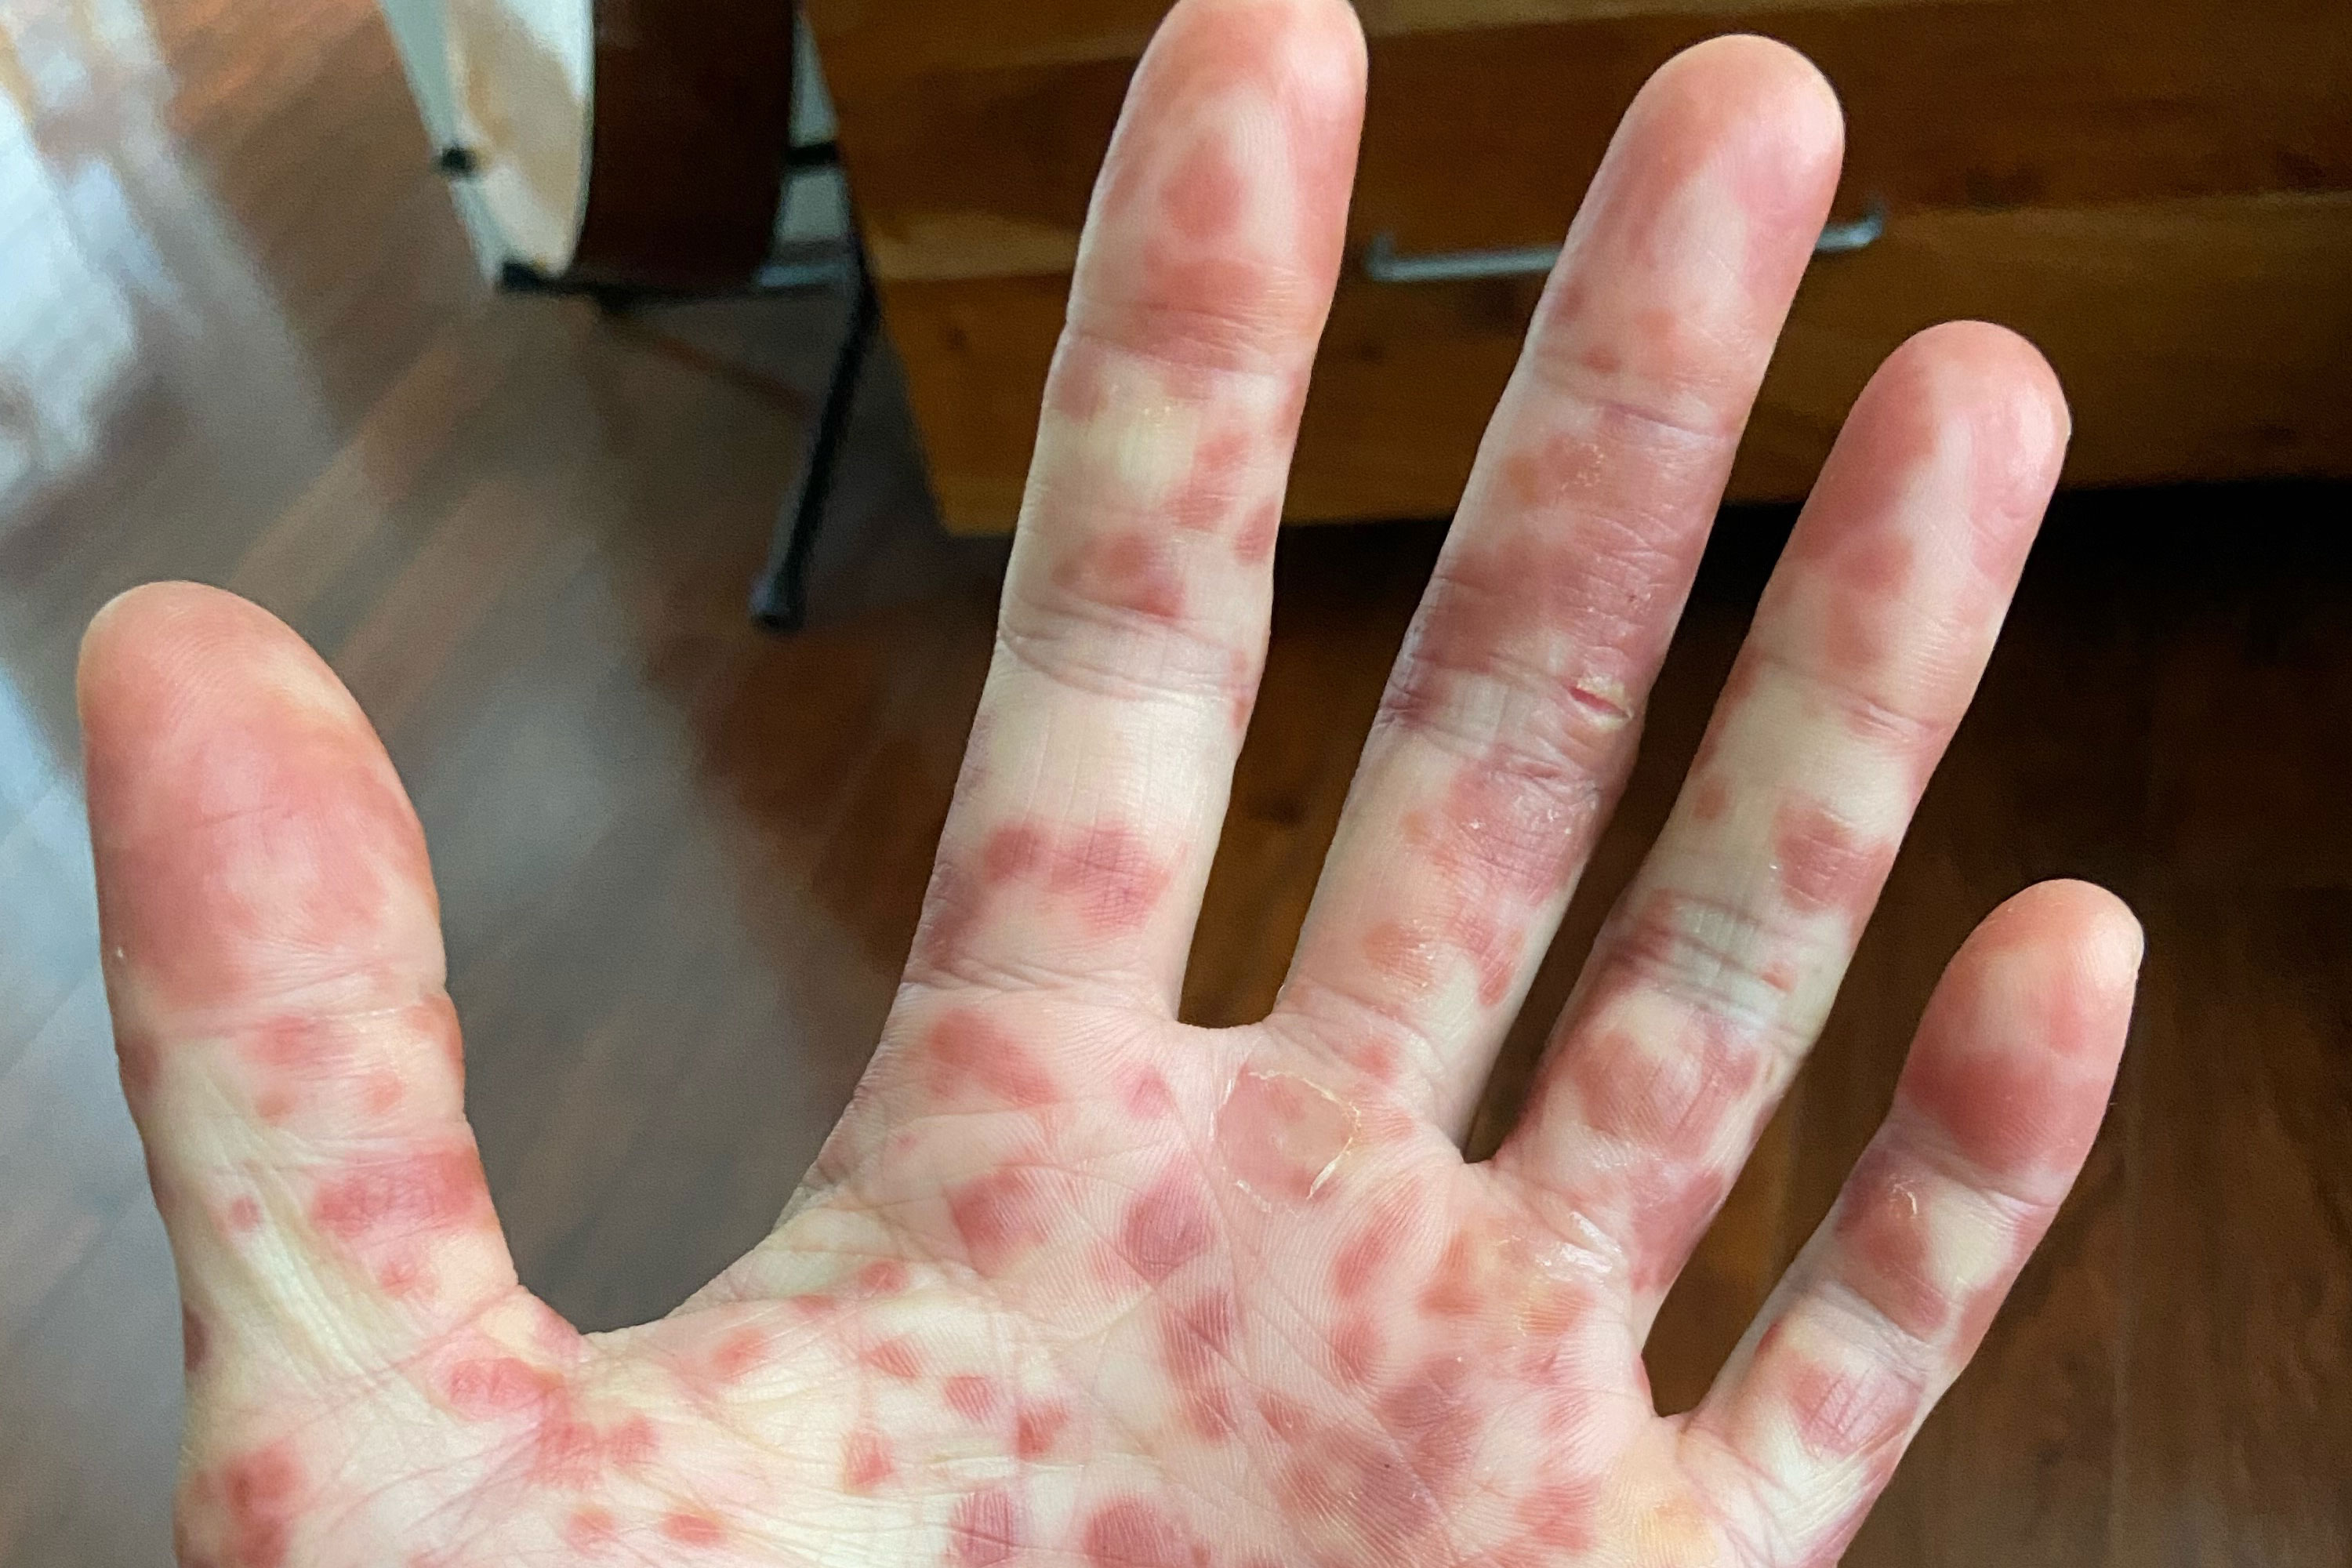 Is There a Treatment for Monkeypox?